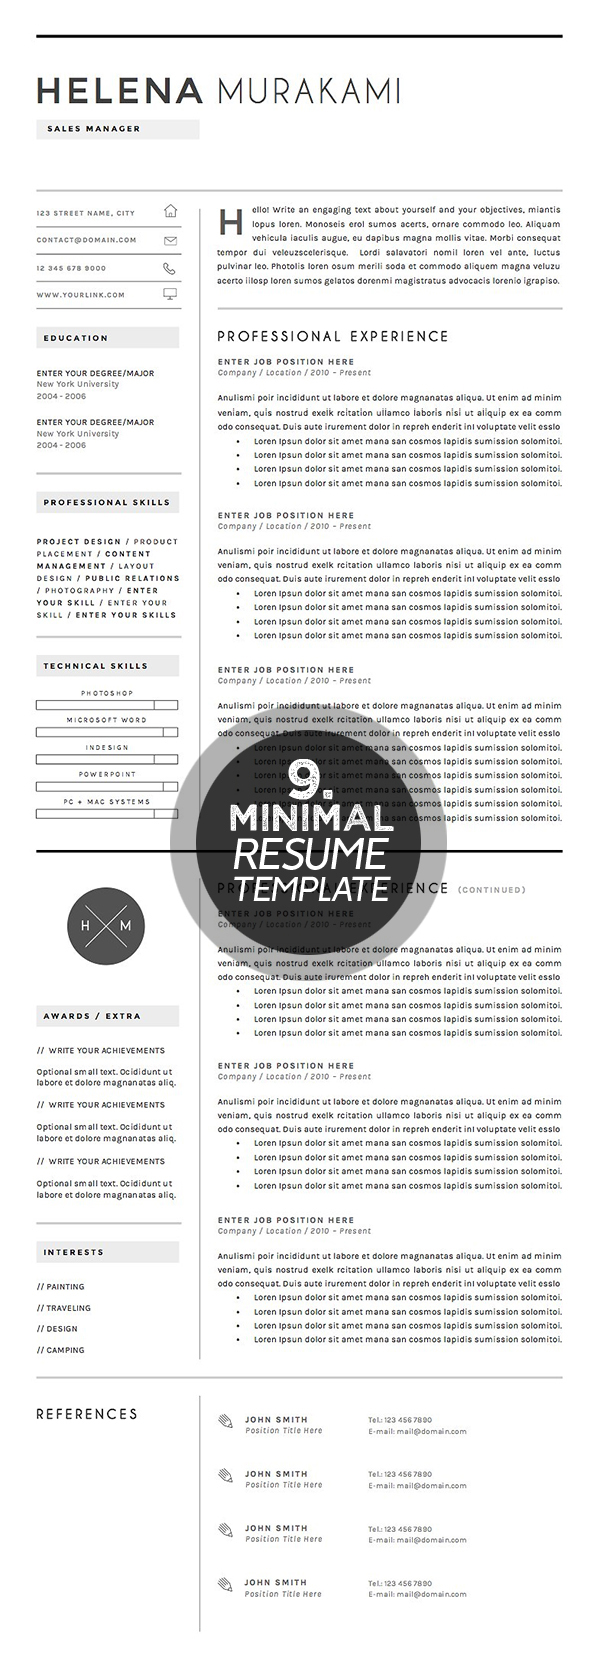 Resume Template 4 pages | Simplifier